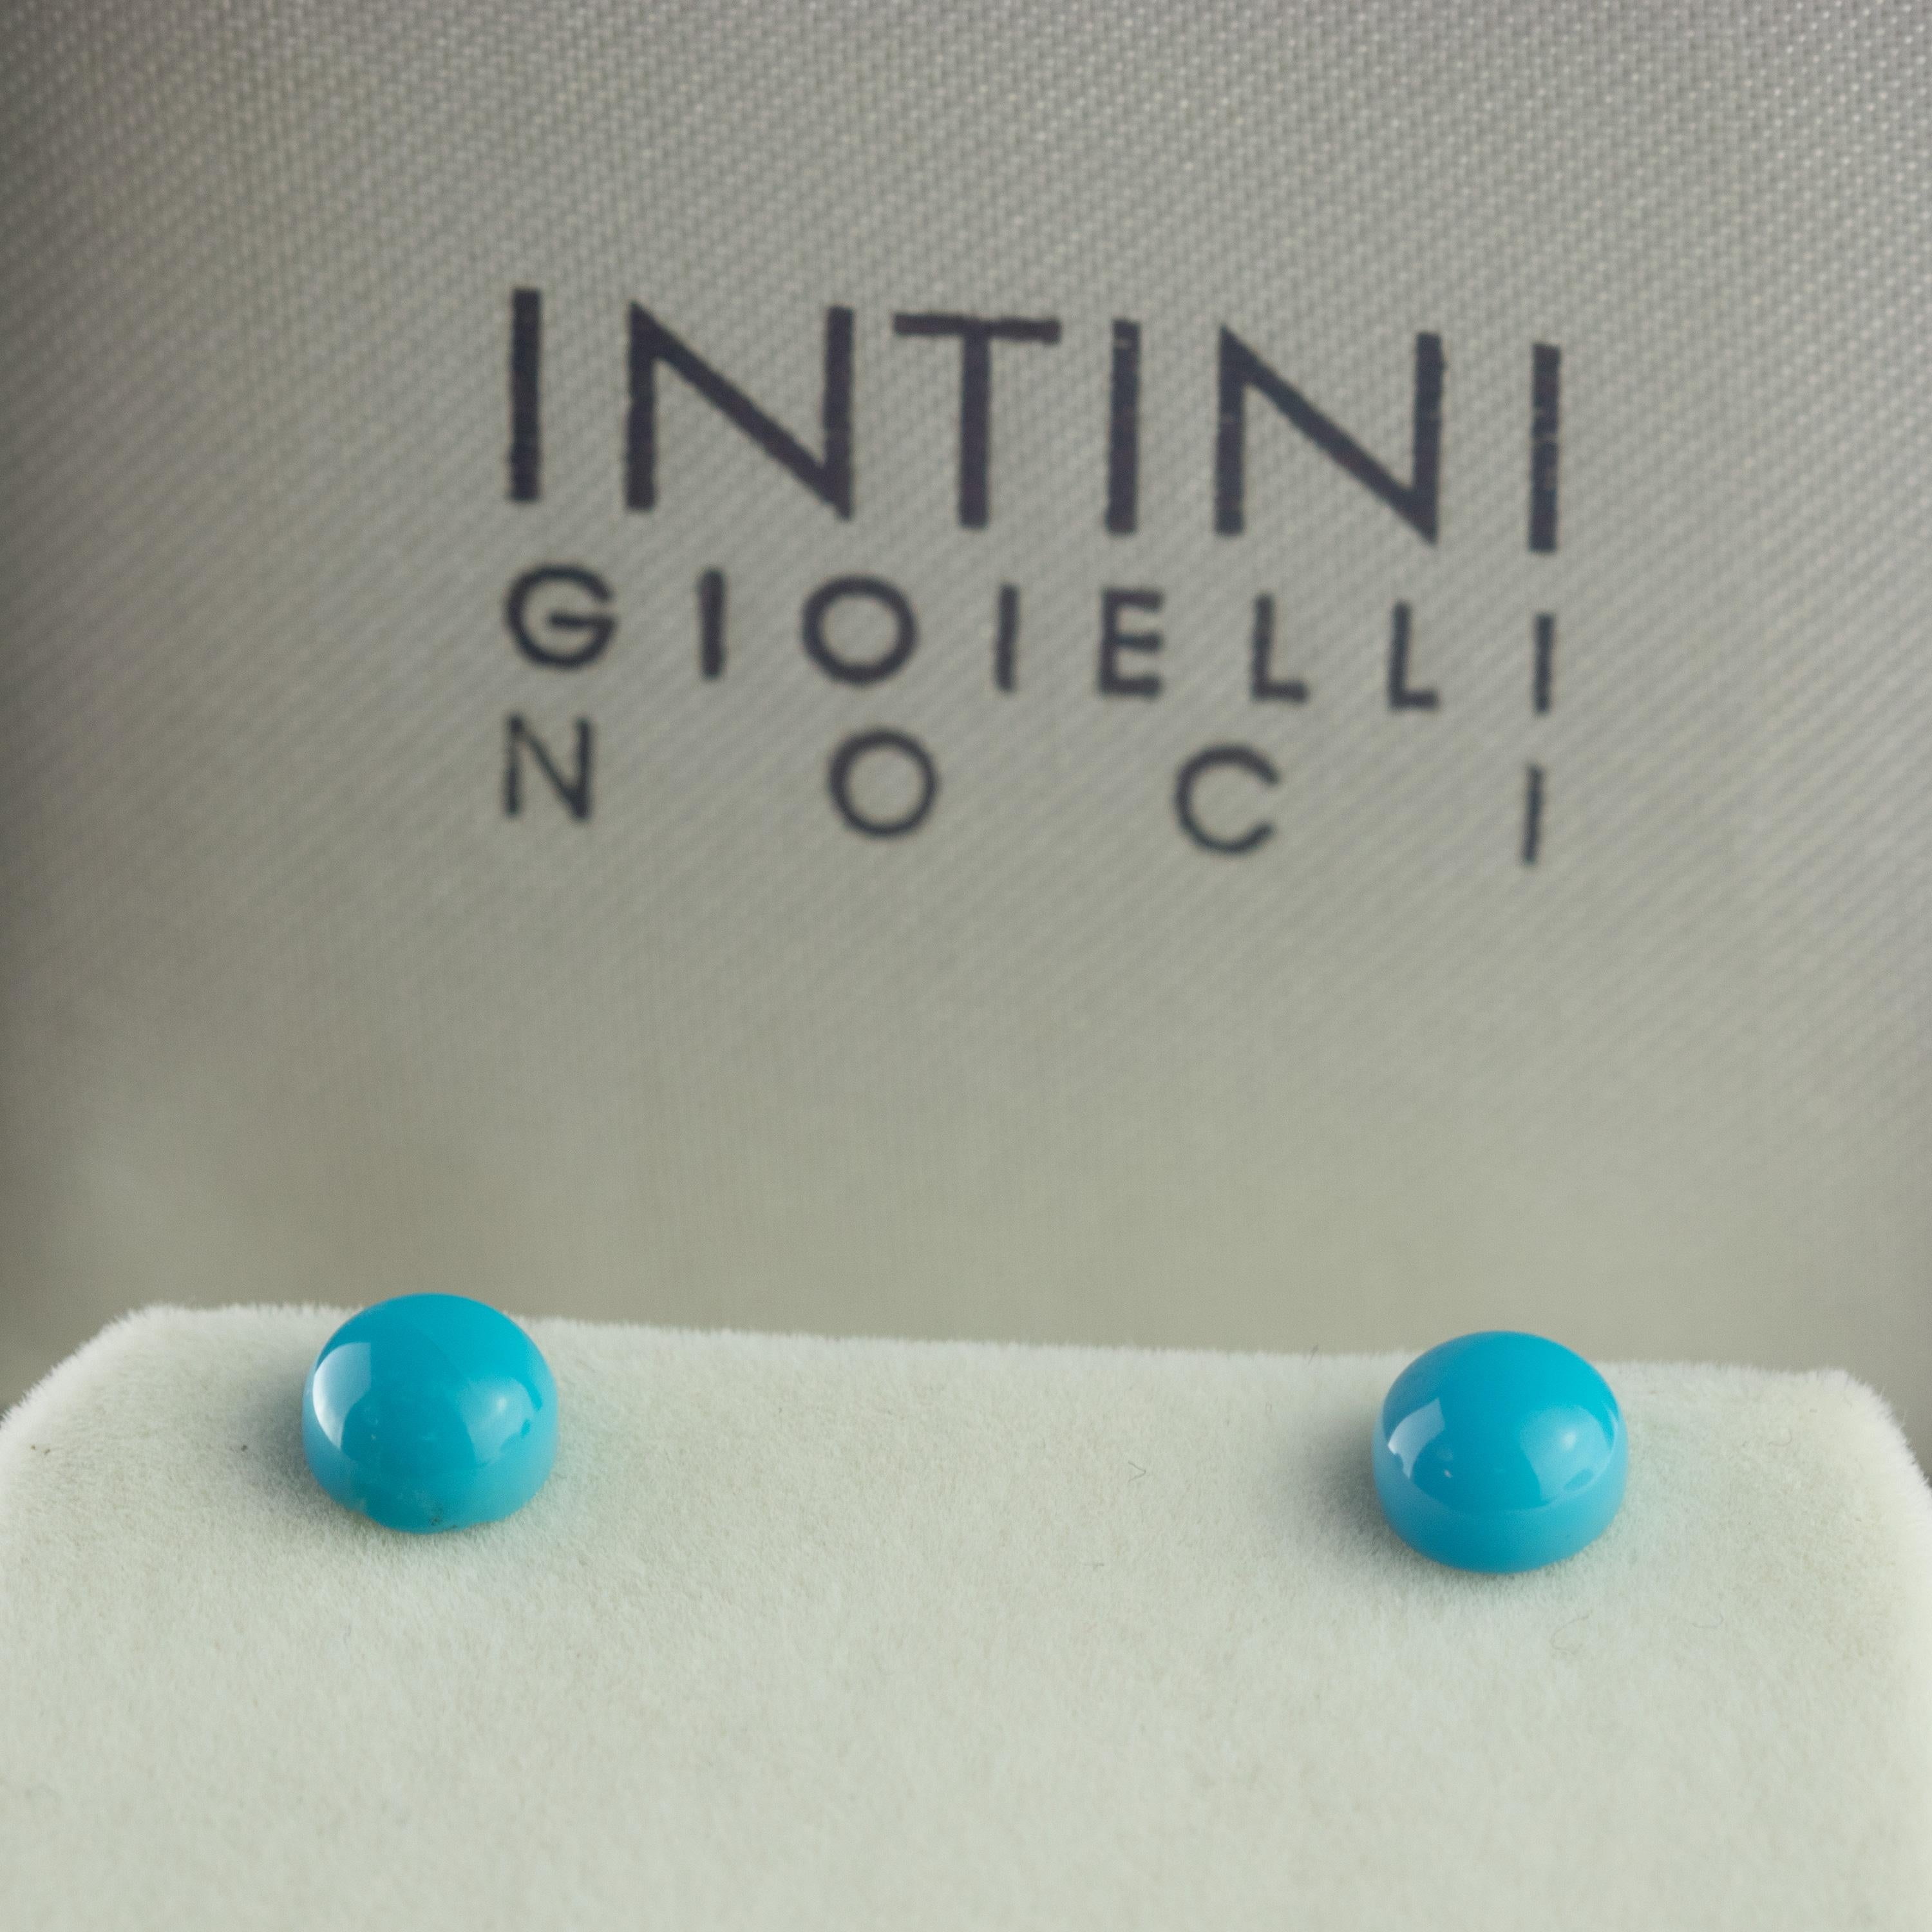 Retro and elegant earrings with an exceptional art work, outstanding display of color and Italian craftsmanship designed by Intini Jewels. This unique chic cocktail earring has a natural round cabochon turquoise stud design.
 
These earrings